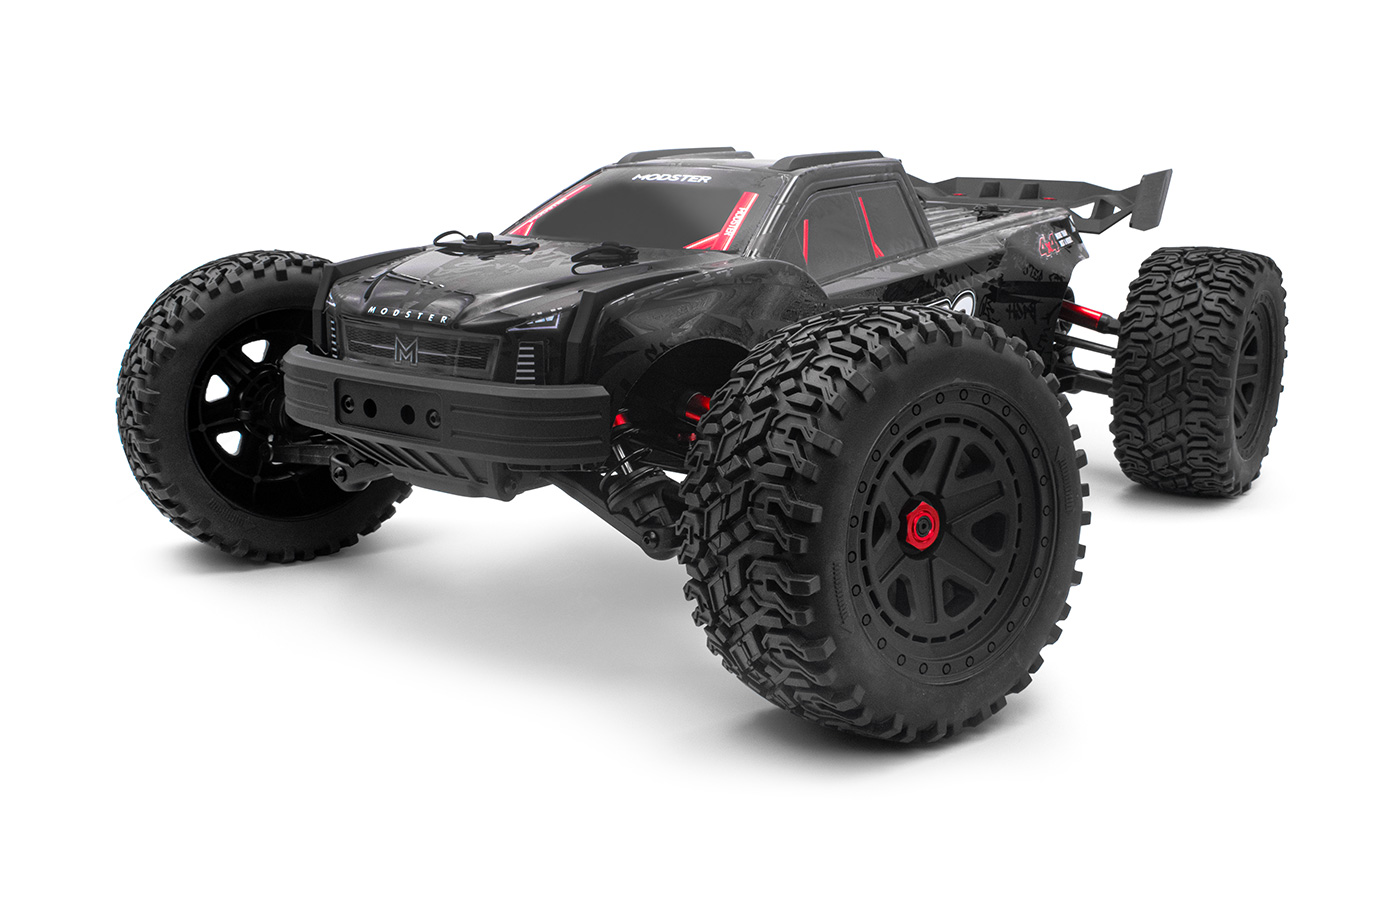 YONCHER YC200 Remote Control Car, 1:16 RC Cars for Adults, 45+km/h High  Speed RC Monster Trucks 4x4 Offroad Waterproof, Remote Control Car for Boys